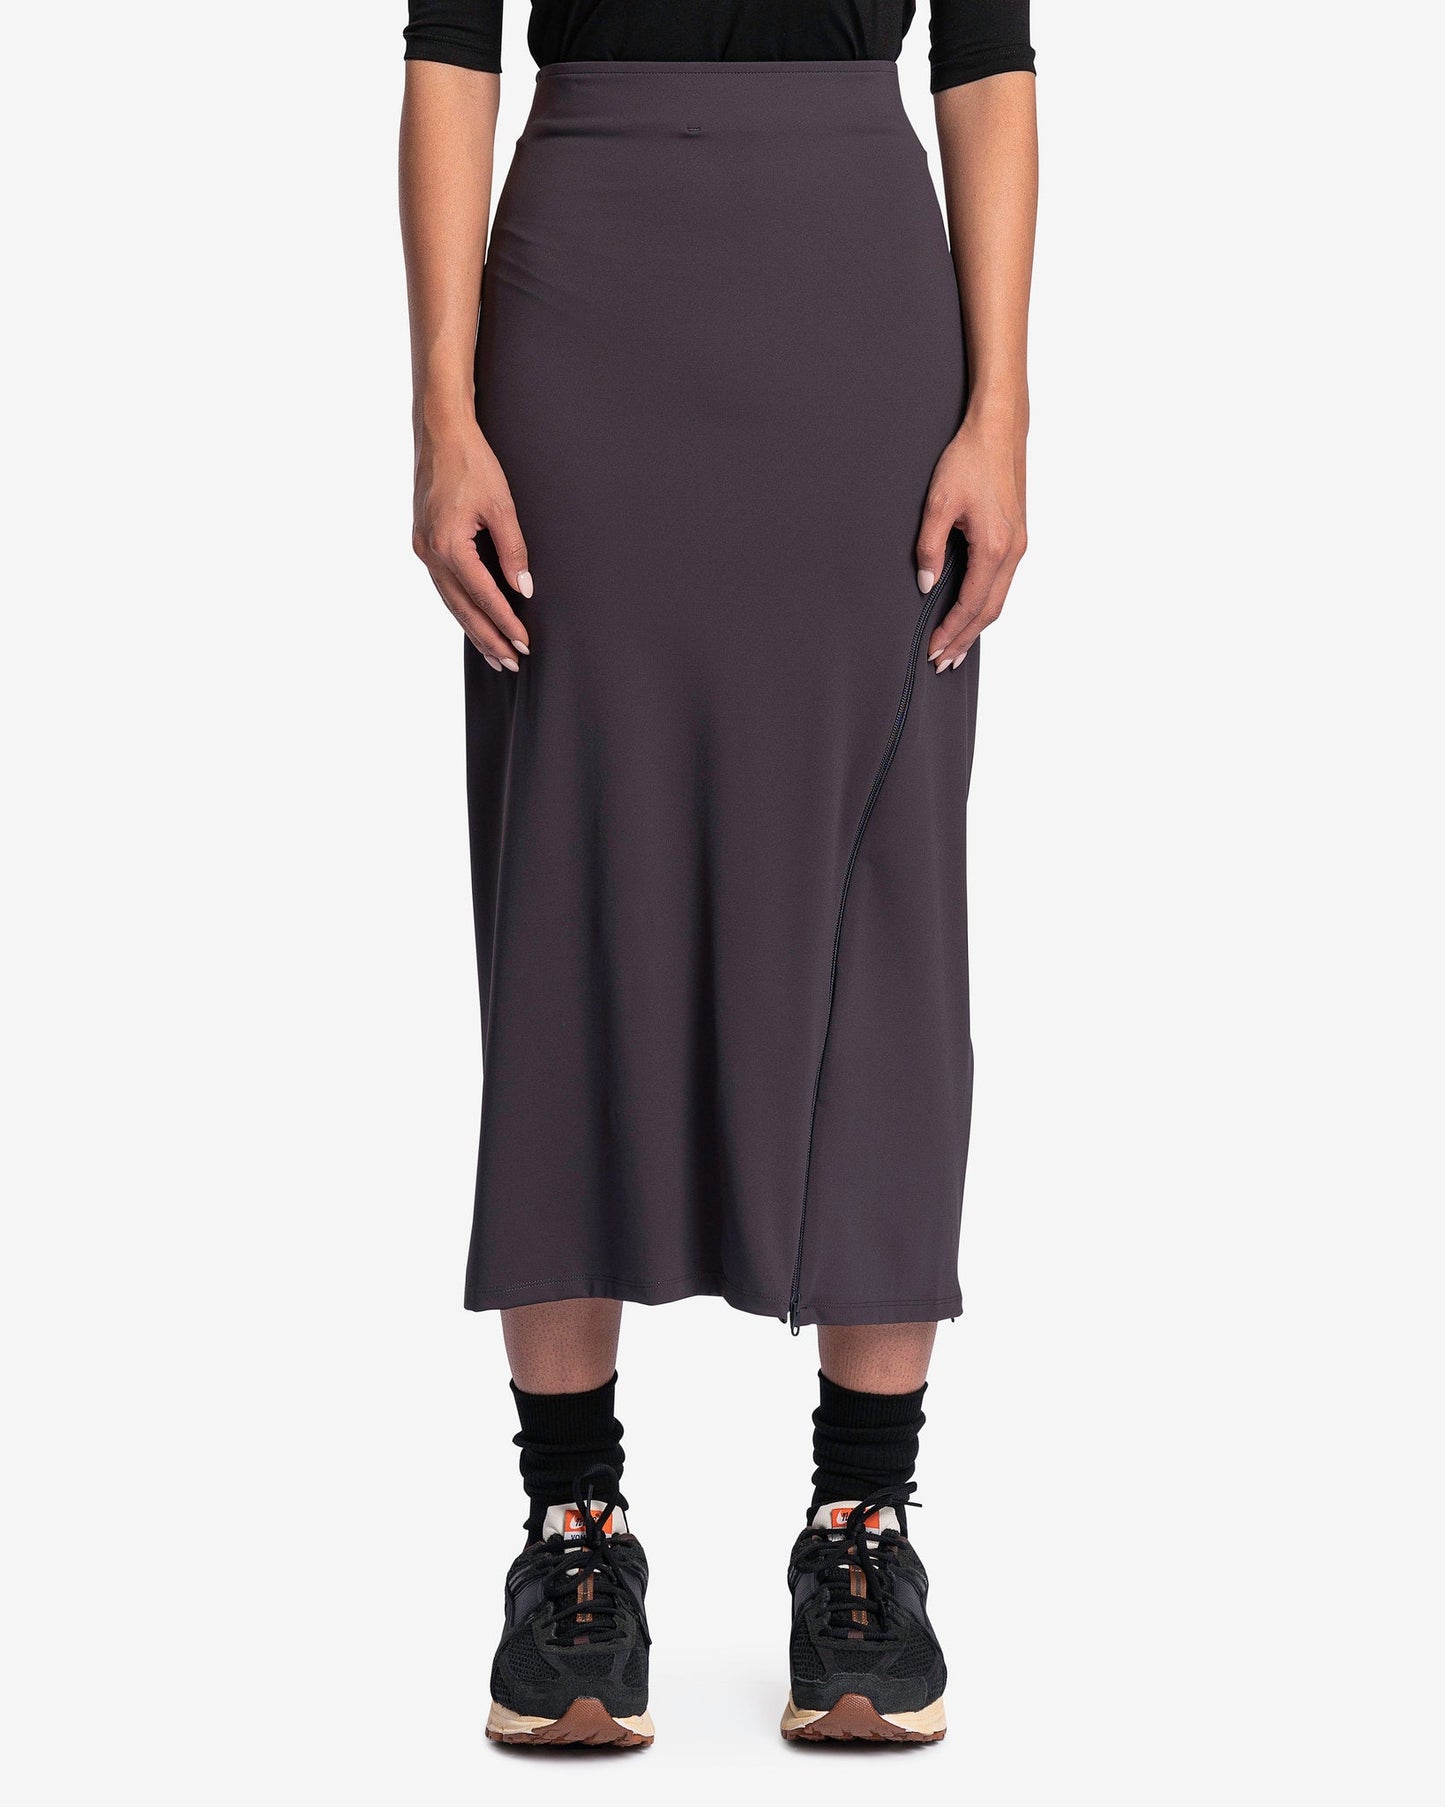 POST ARCHIVE FACTION (P.A.F) Women Skirts 5.0+ Skirt Center in Charcoal